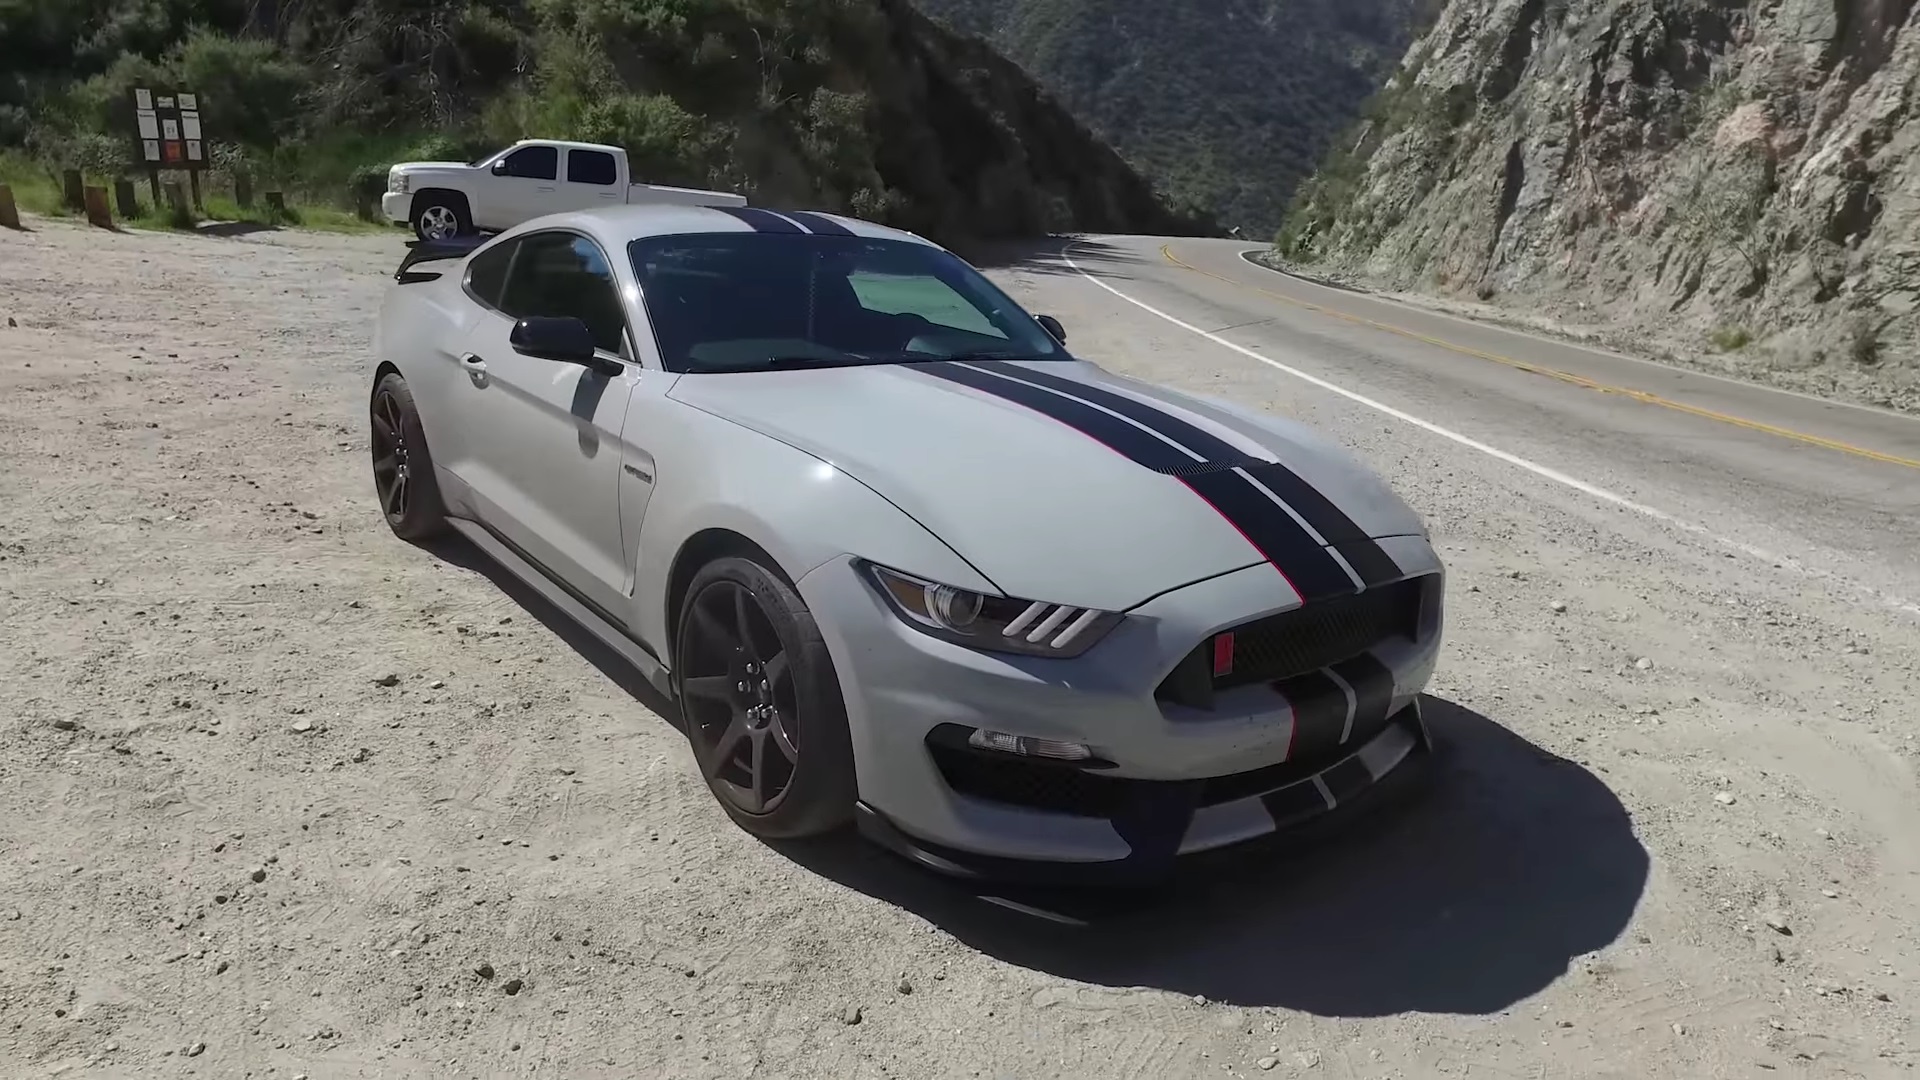 Video: 2016 Ford Mustang Shelby GT350R - One Take